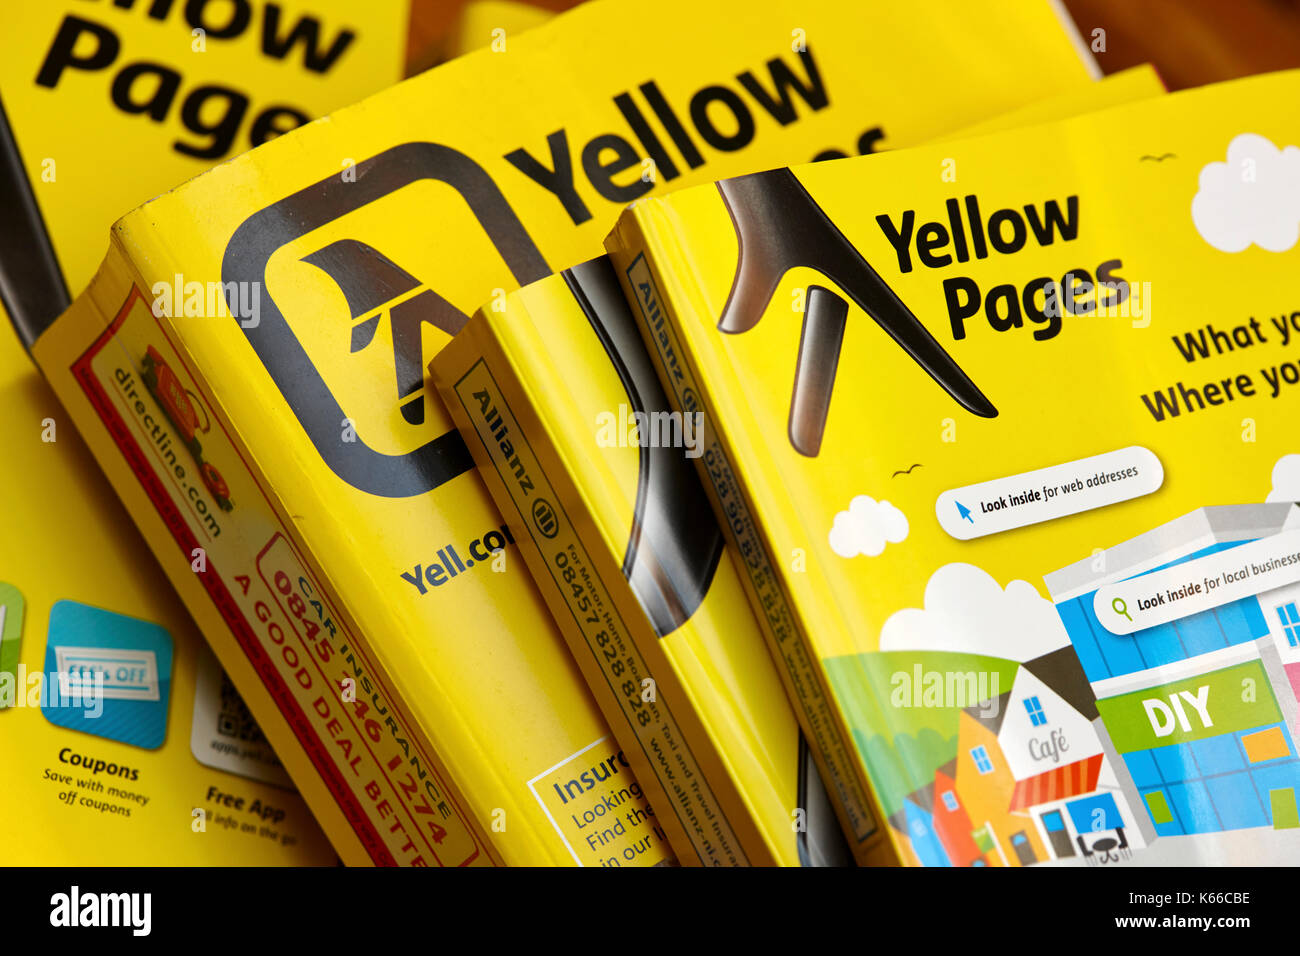 list business on yellow pages